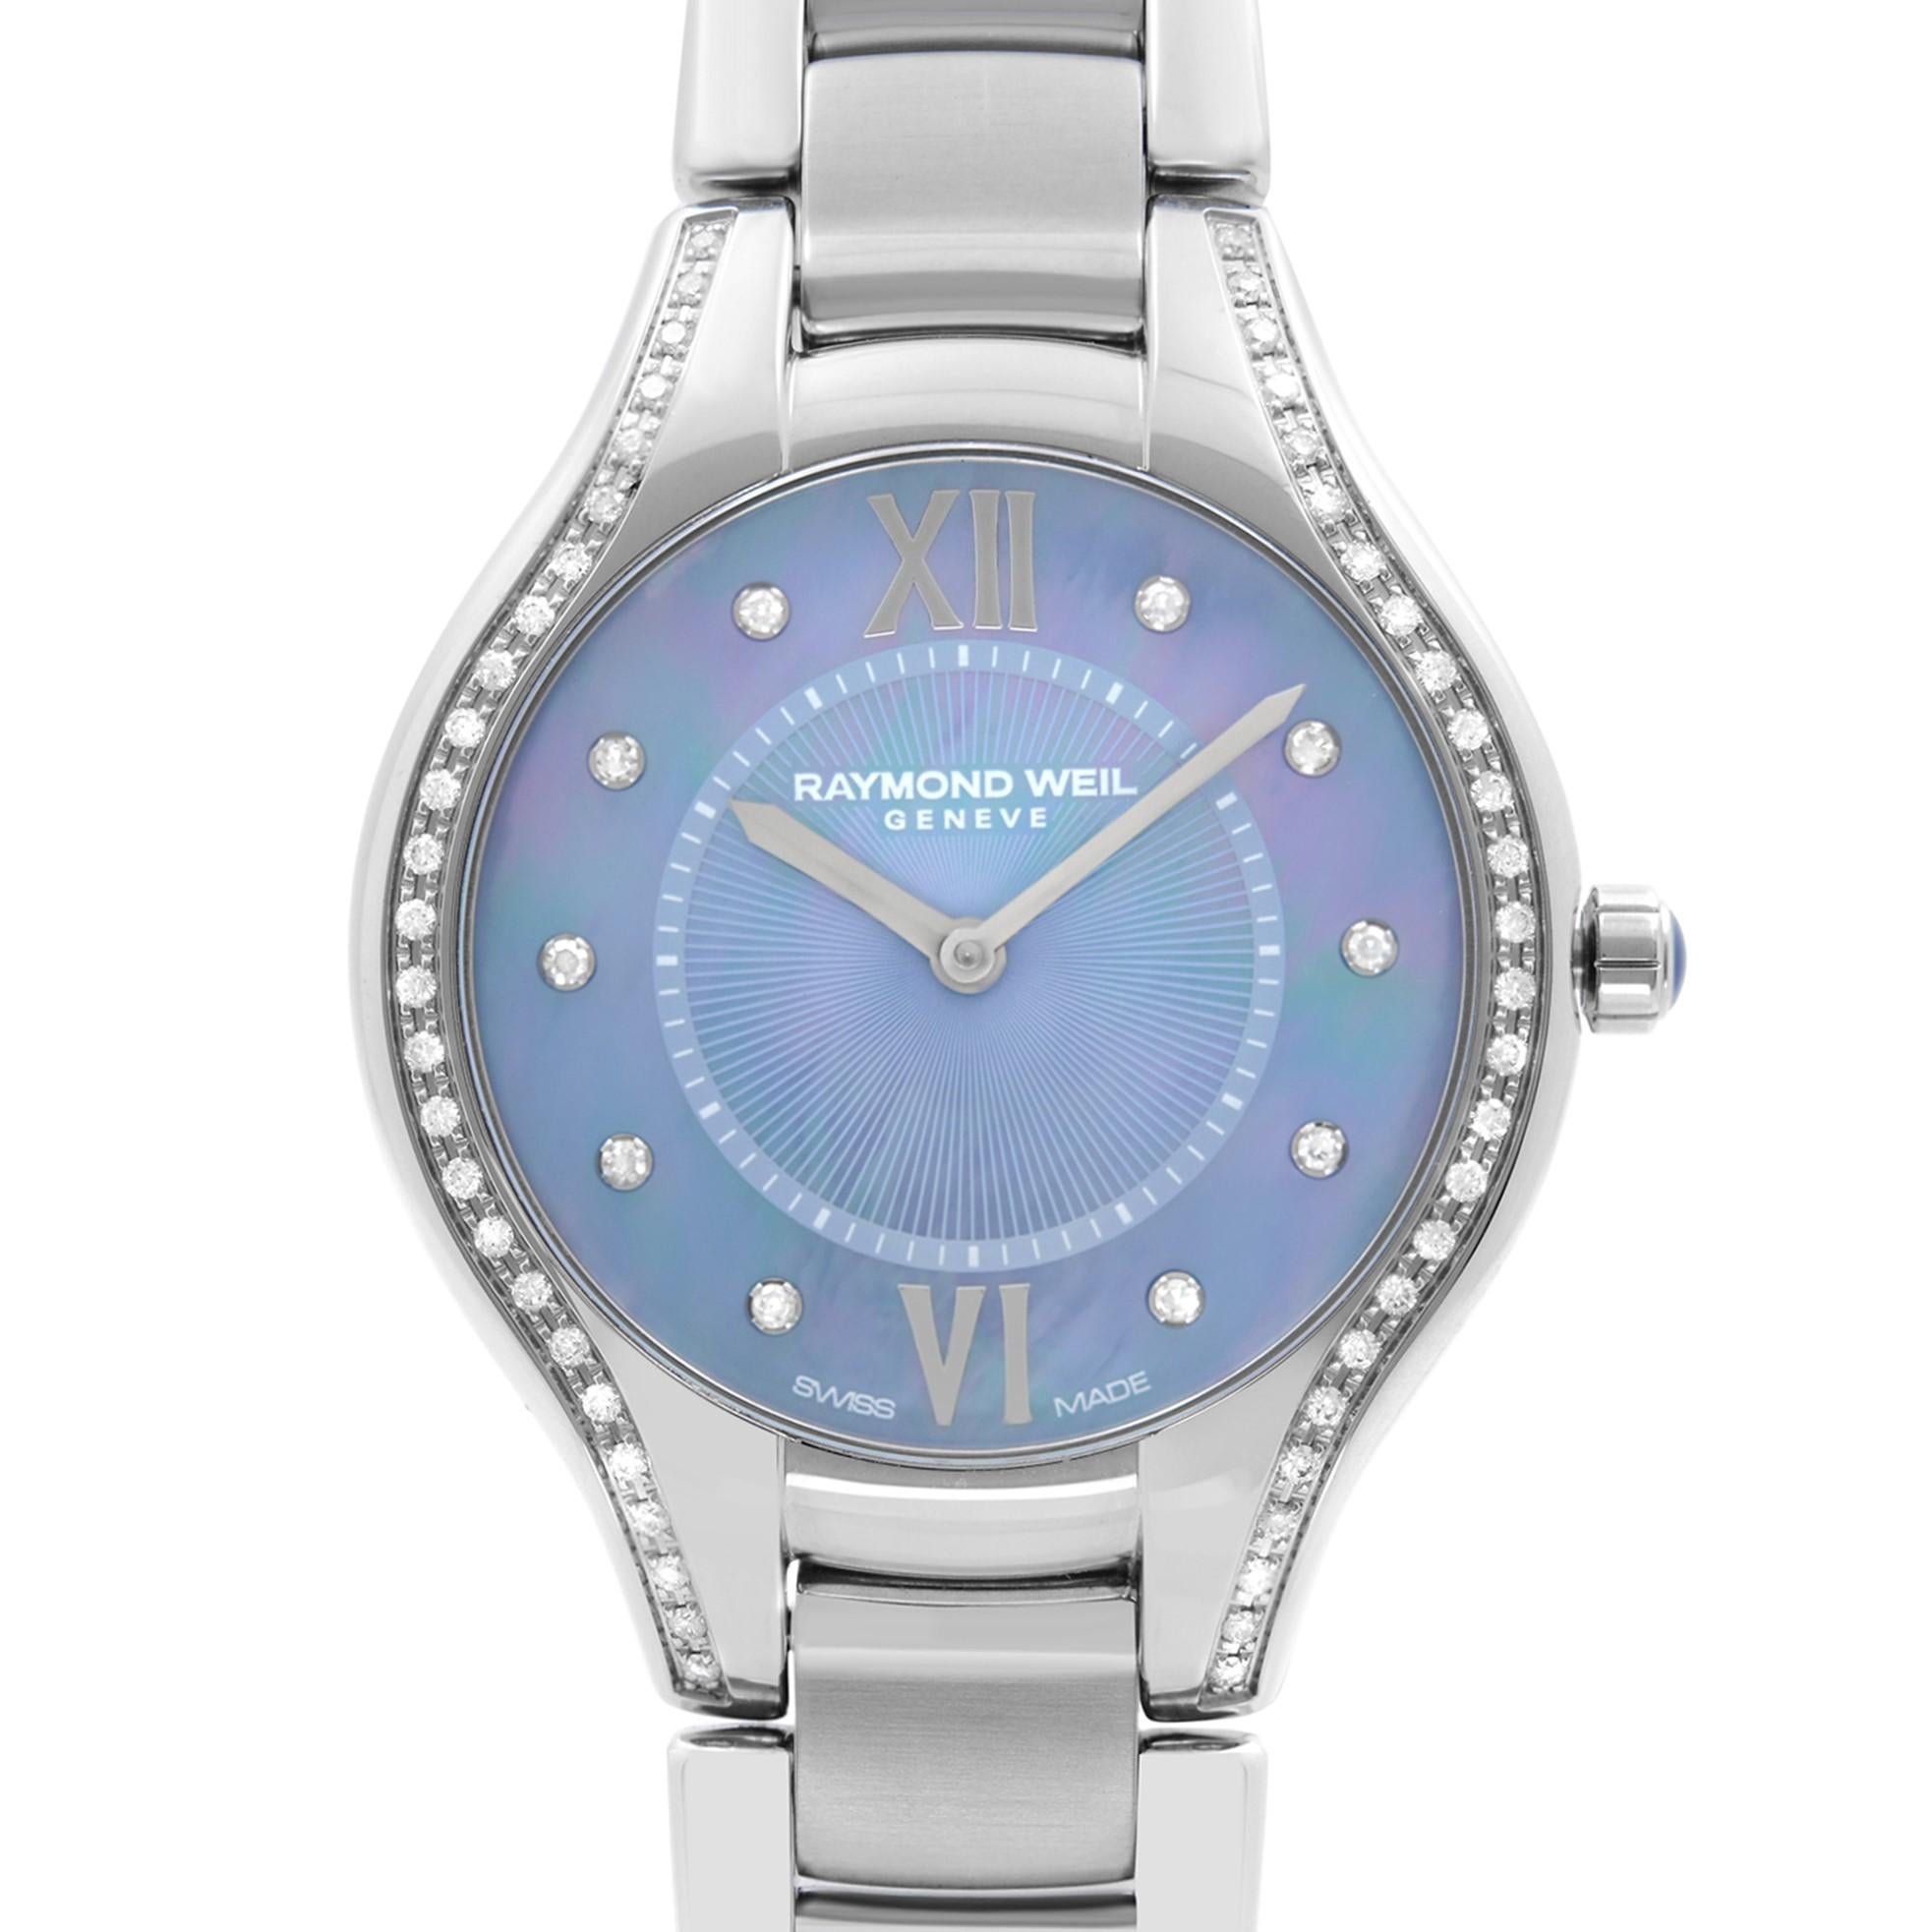 Never Worn Raymond Weil Noemia Steel Diamond Blue MOP Ladies Quartz Watch 5132-STS-00955. This Beautiful Timepiece Features: Stainless Steel Case and Bracelet, Fixed Stainless Steel Bezel Set with Diamonds, Blue Mother-of-Pearl Dial with Silver-Tone